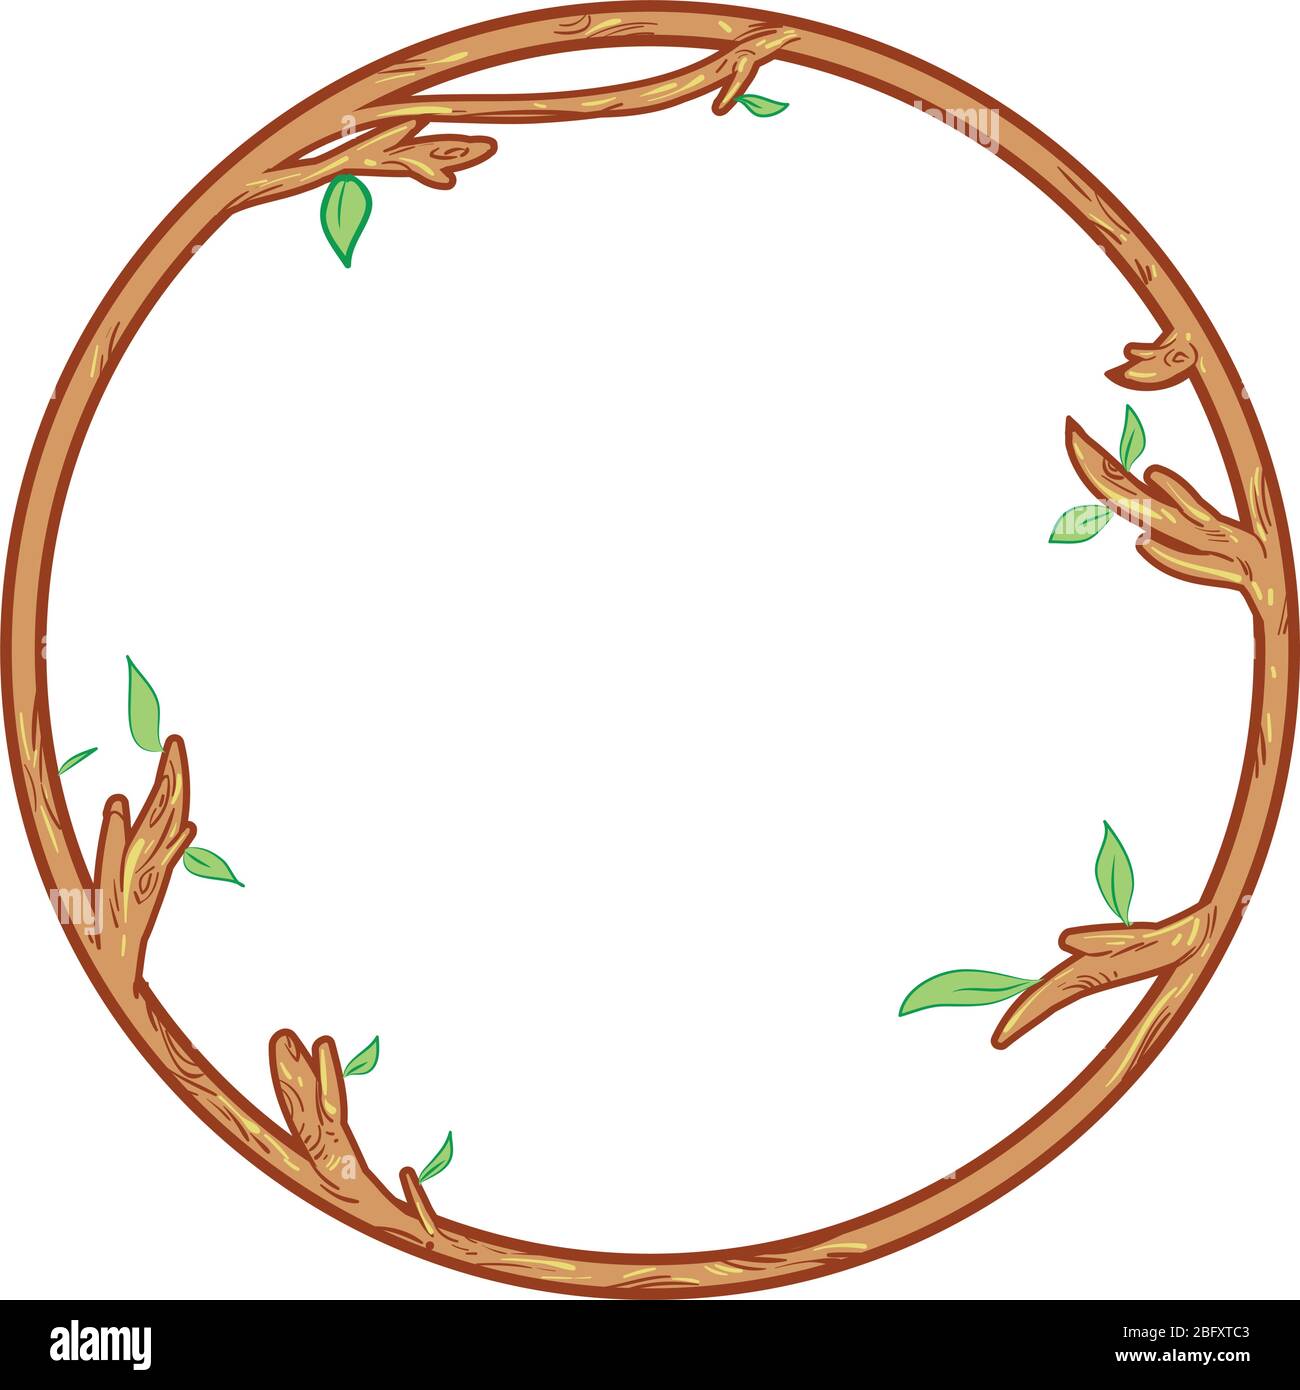 circular wooden frame isolate on white background Stock Vector